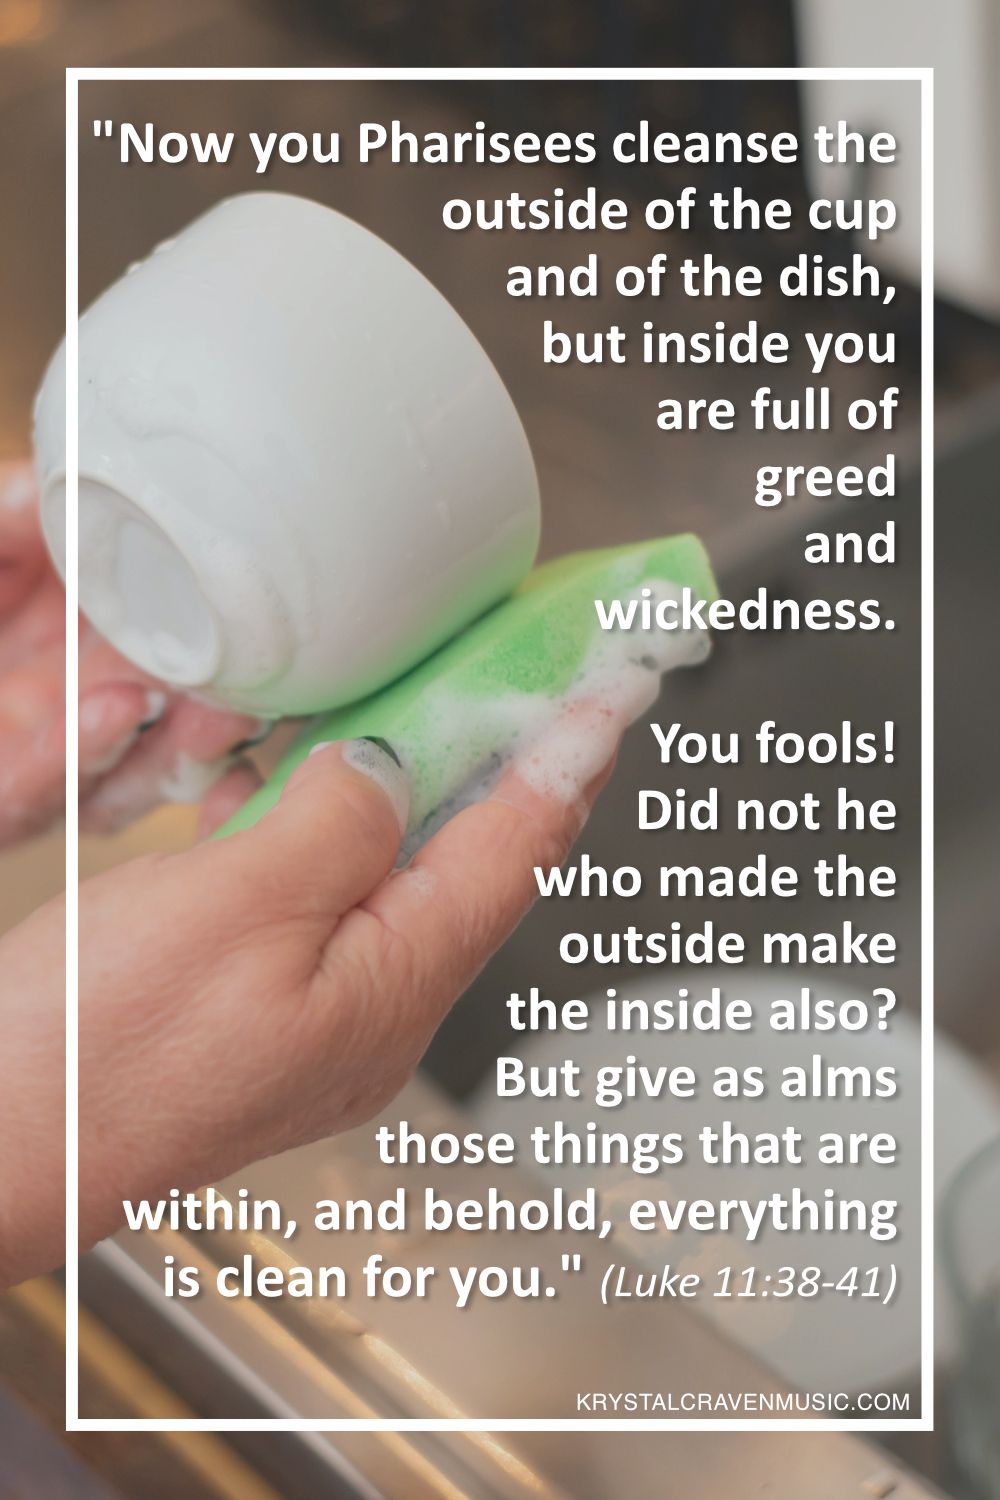 The text from Luke 11:38-41 "Now you Pharisees cleanse the outside of the cup and of the dish, but inside you are full of greed and wickedness. You fools! Did not he who made the outside make the inside also? But give as alms those things that are within, and behold, everything is clean for you." over a picture of a person's hands cleaning a cup with a sponge over a sink.